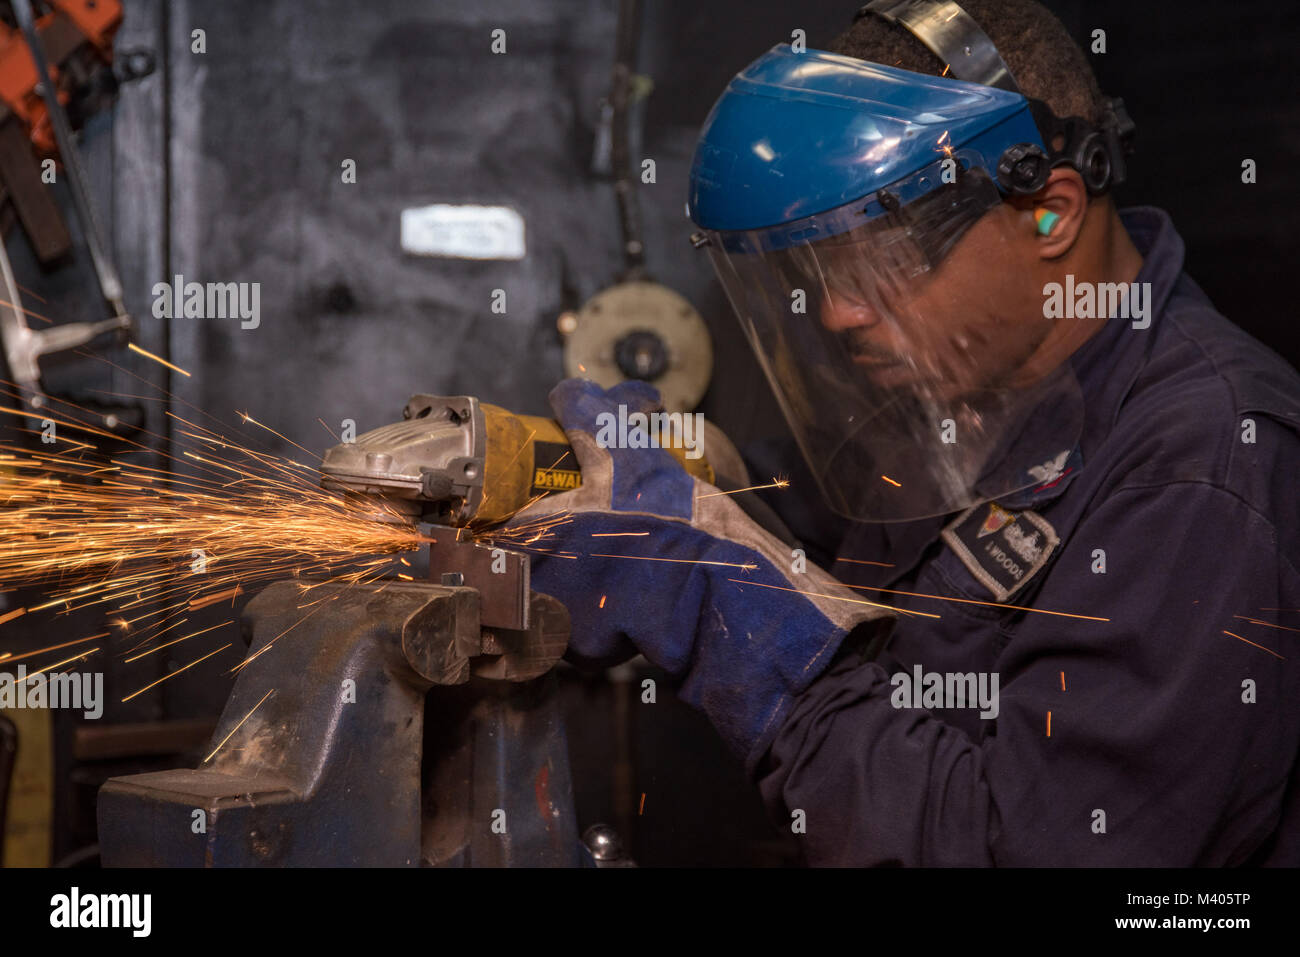 180206-N-CG677-0026  PACIFIC OCEAN (Feb. 6, 2018) Hull Technician 3rd Class Devonta Woods grinds a piece of metal in the machine shop of the Nimitz-class aircraft carrier USS Carl Vinson (CVN 70). Carl Vinson Strike Group is currently operating in the Pacific as part of a regularly scheduled deployment. (U.S. Navy photo by Mass Communication Specialist 3rd Class Jake Cannady/Released) Stock Photo